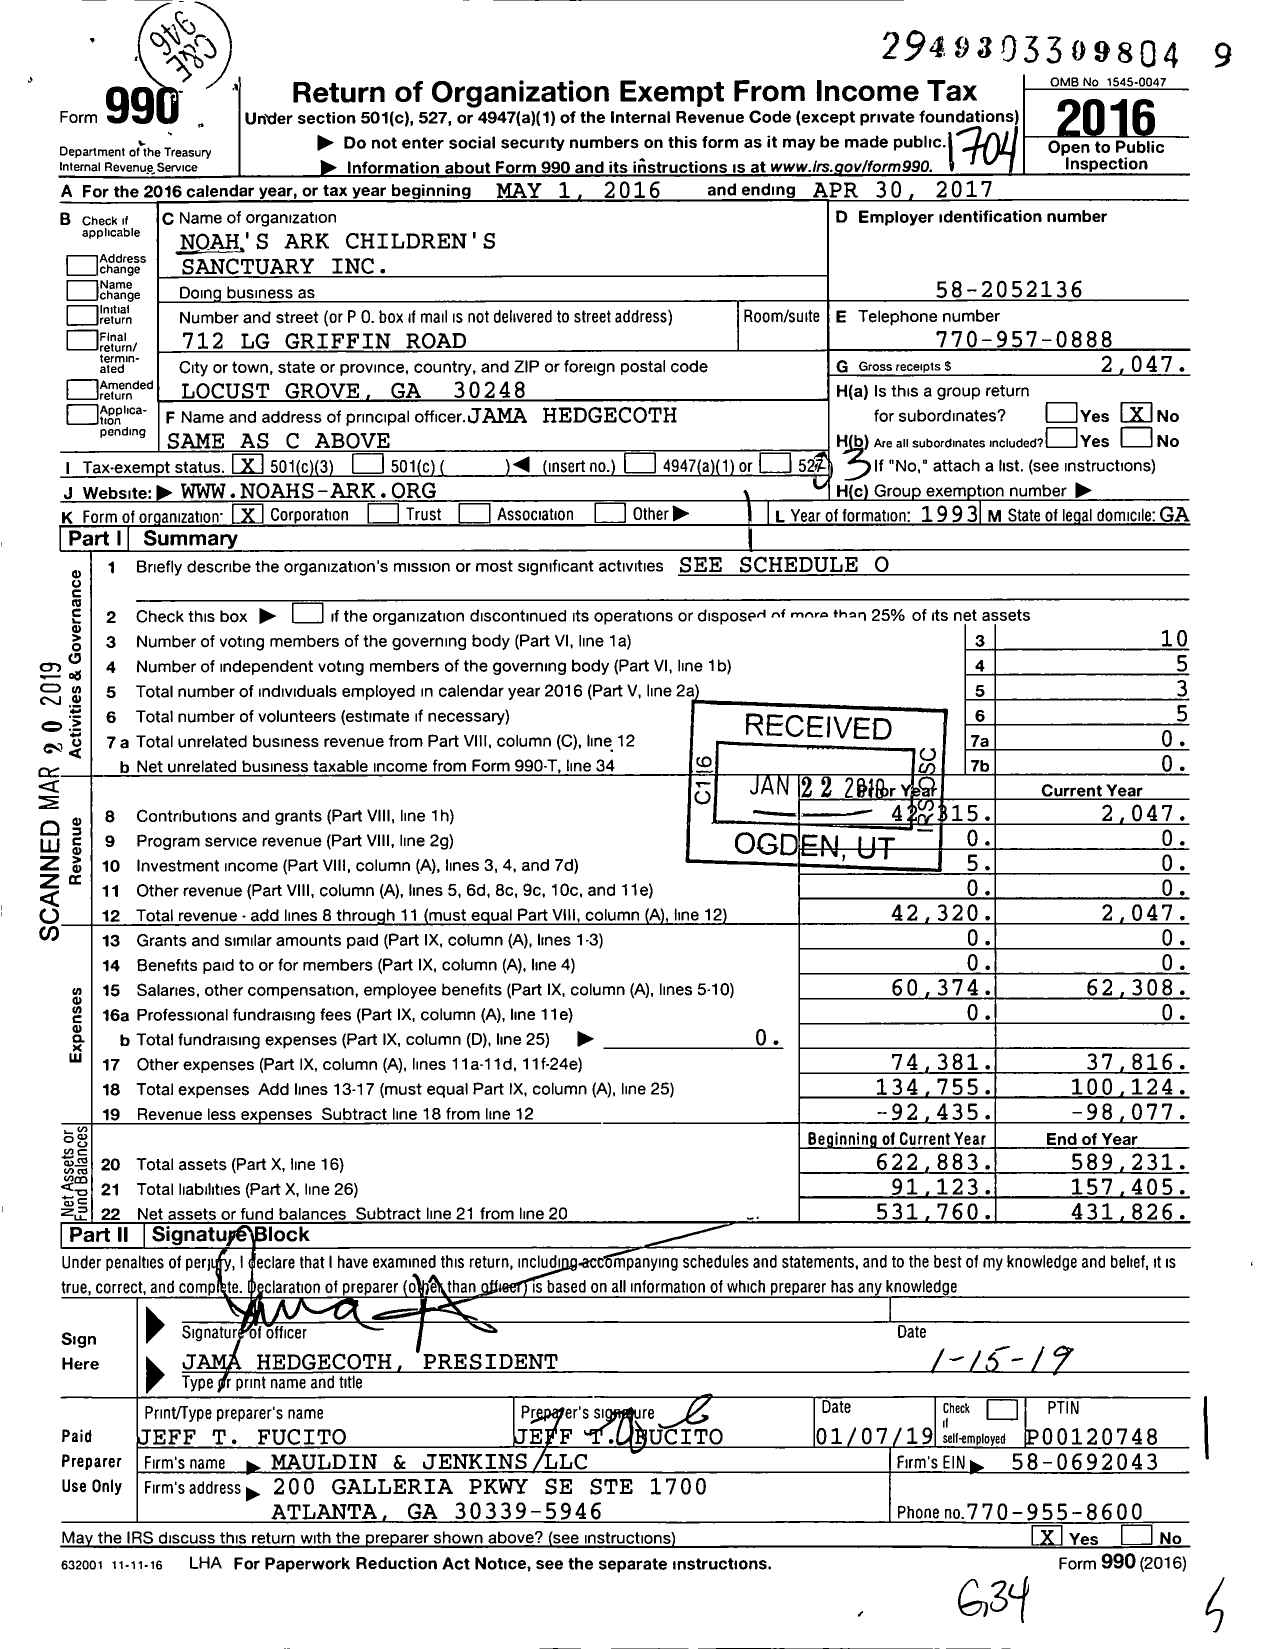 Image of first page of 2016 Form 990 for Noah's Ark Animal Children's Sanctuary I Sanctuary